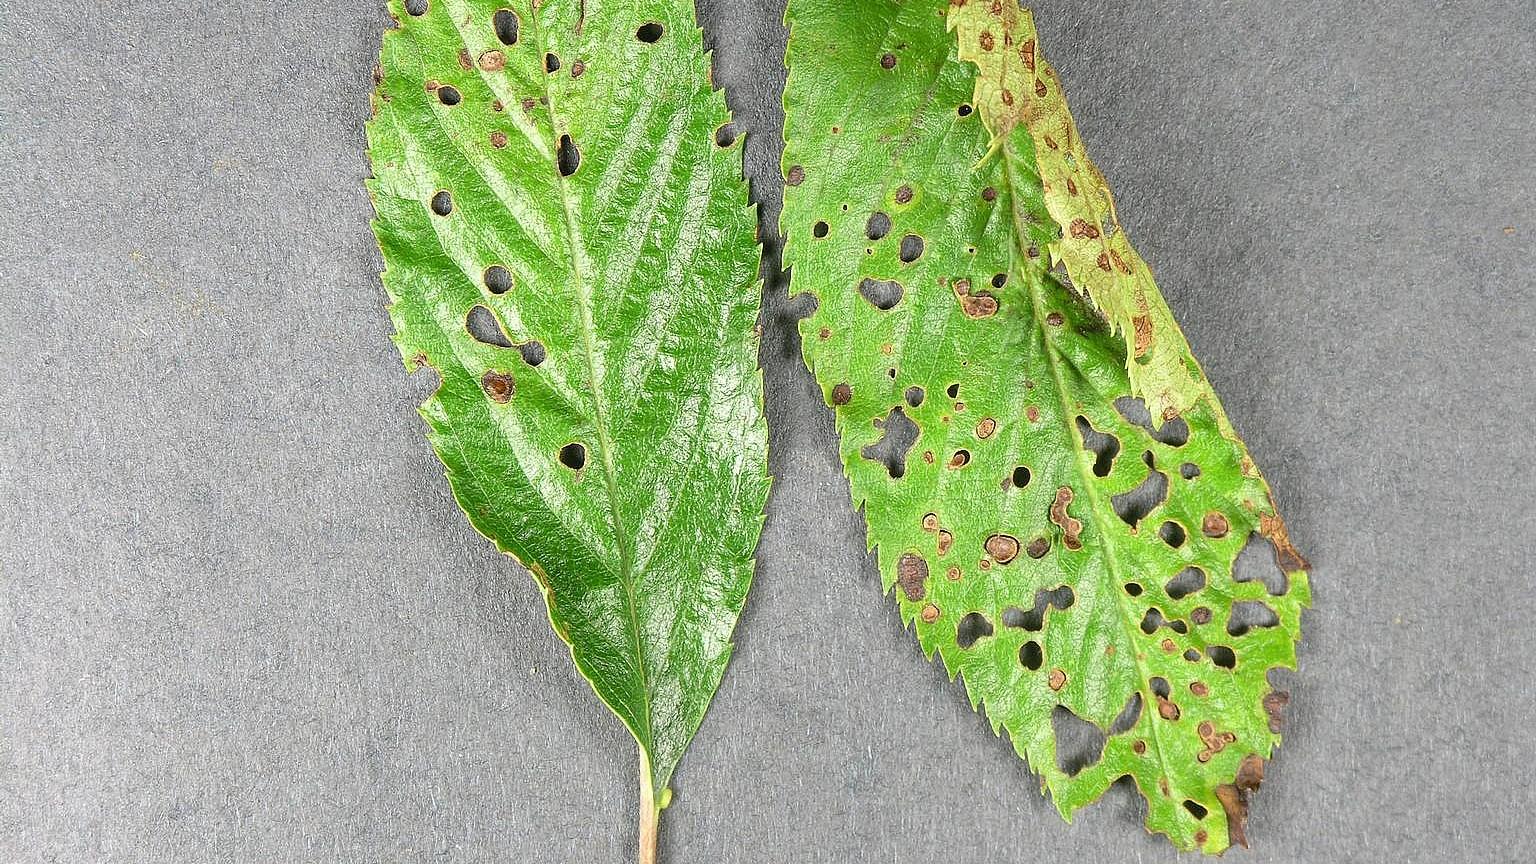 holes in cherry tree leaves - leaves drop early - cherry shot hole symptoms